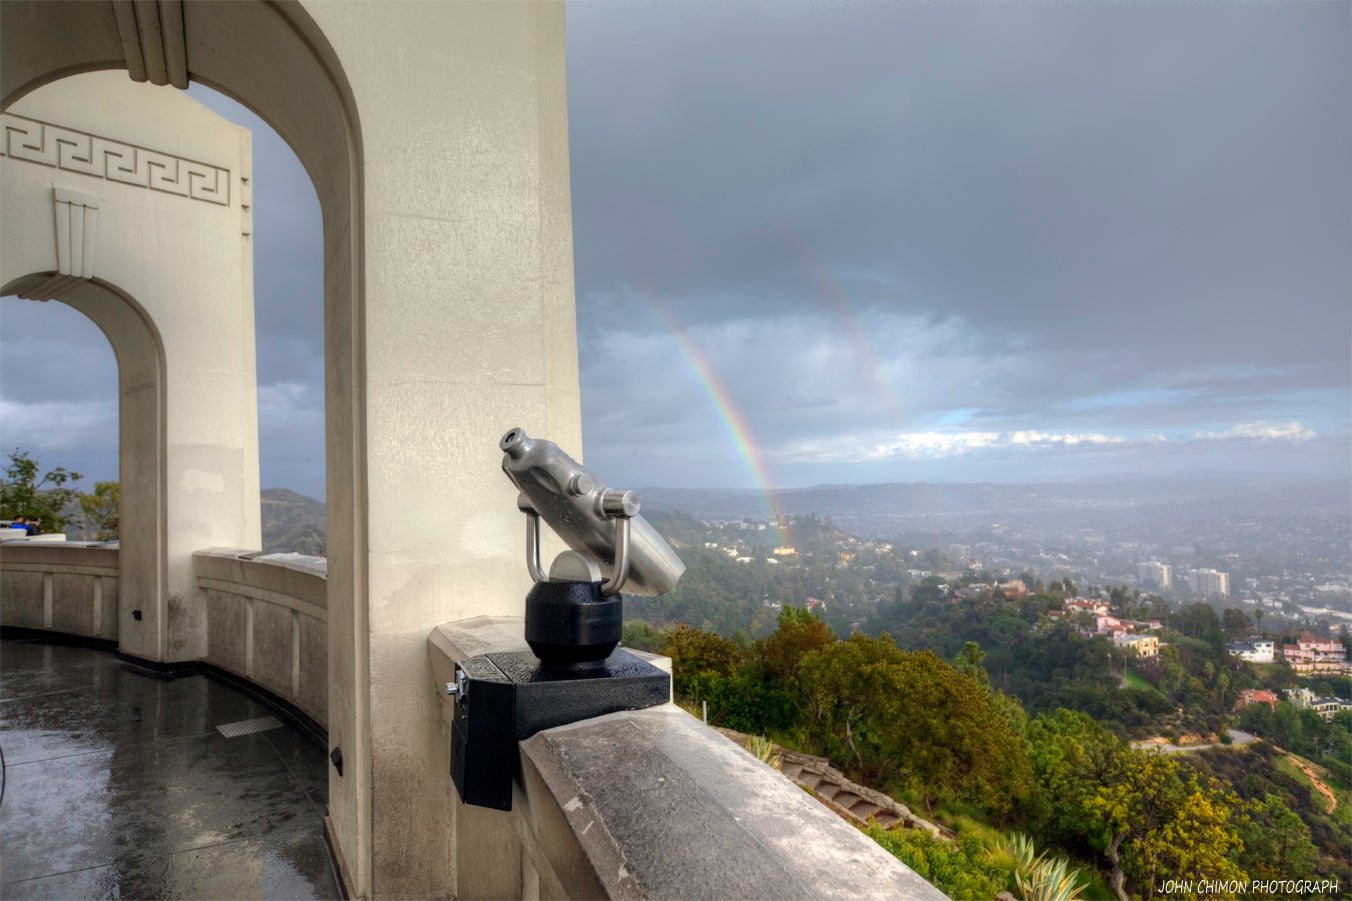 Rainy Day Activities in Los Angeles: 15 Favorite Things to Do